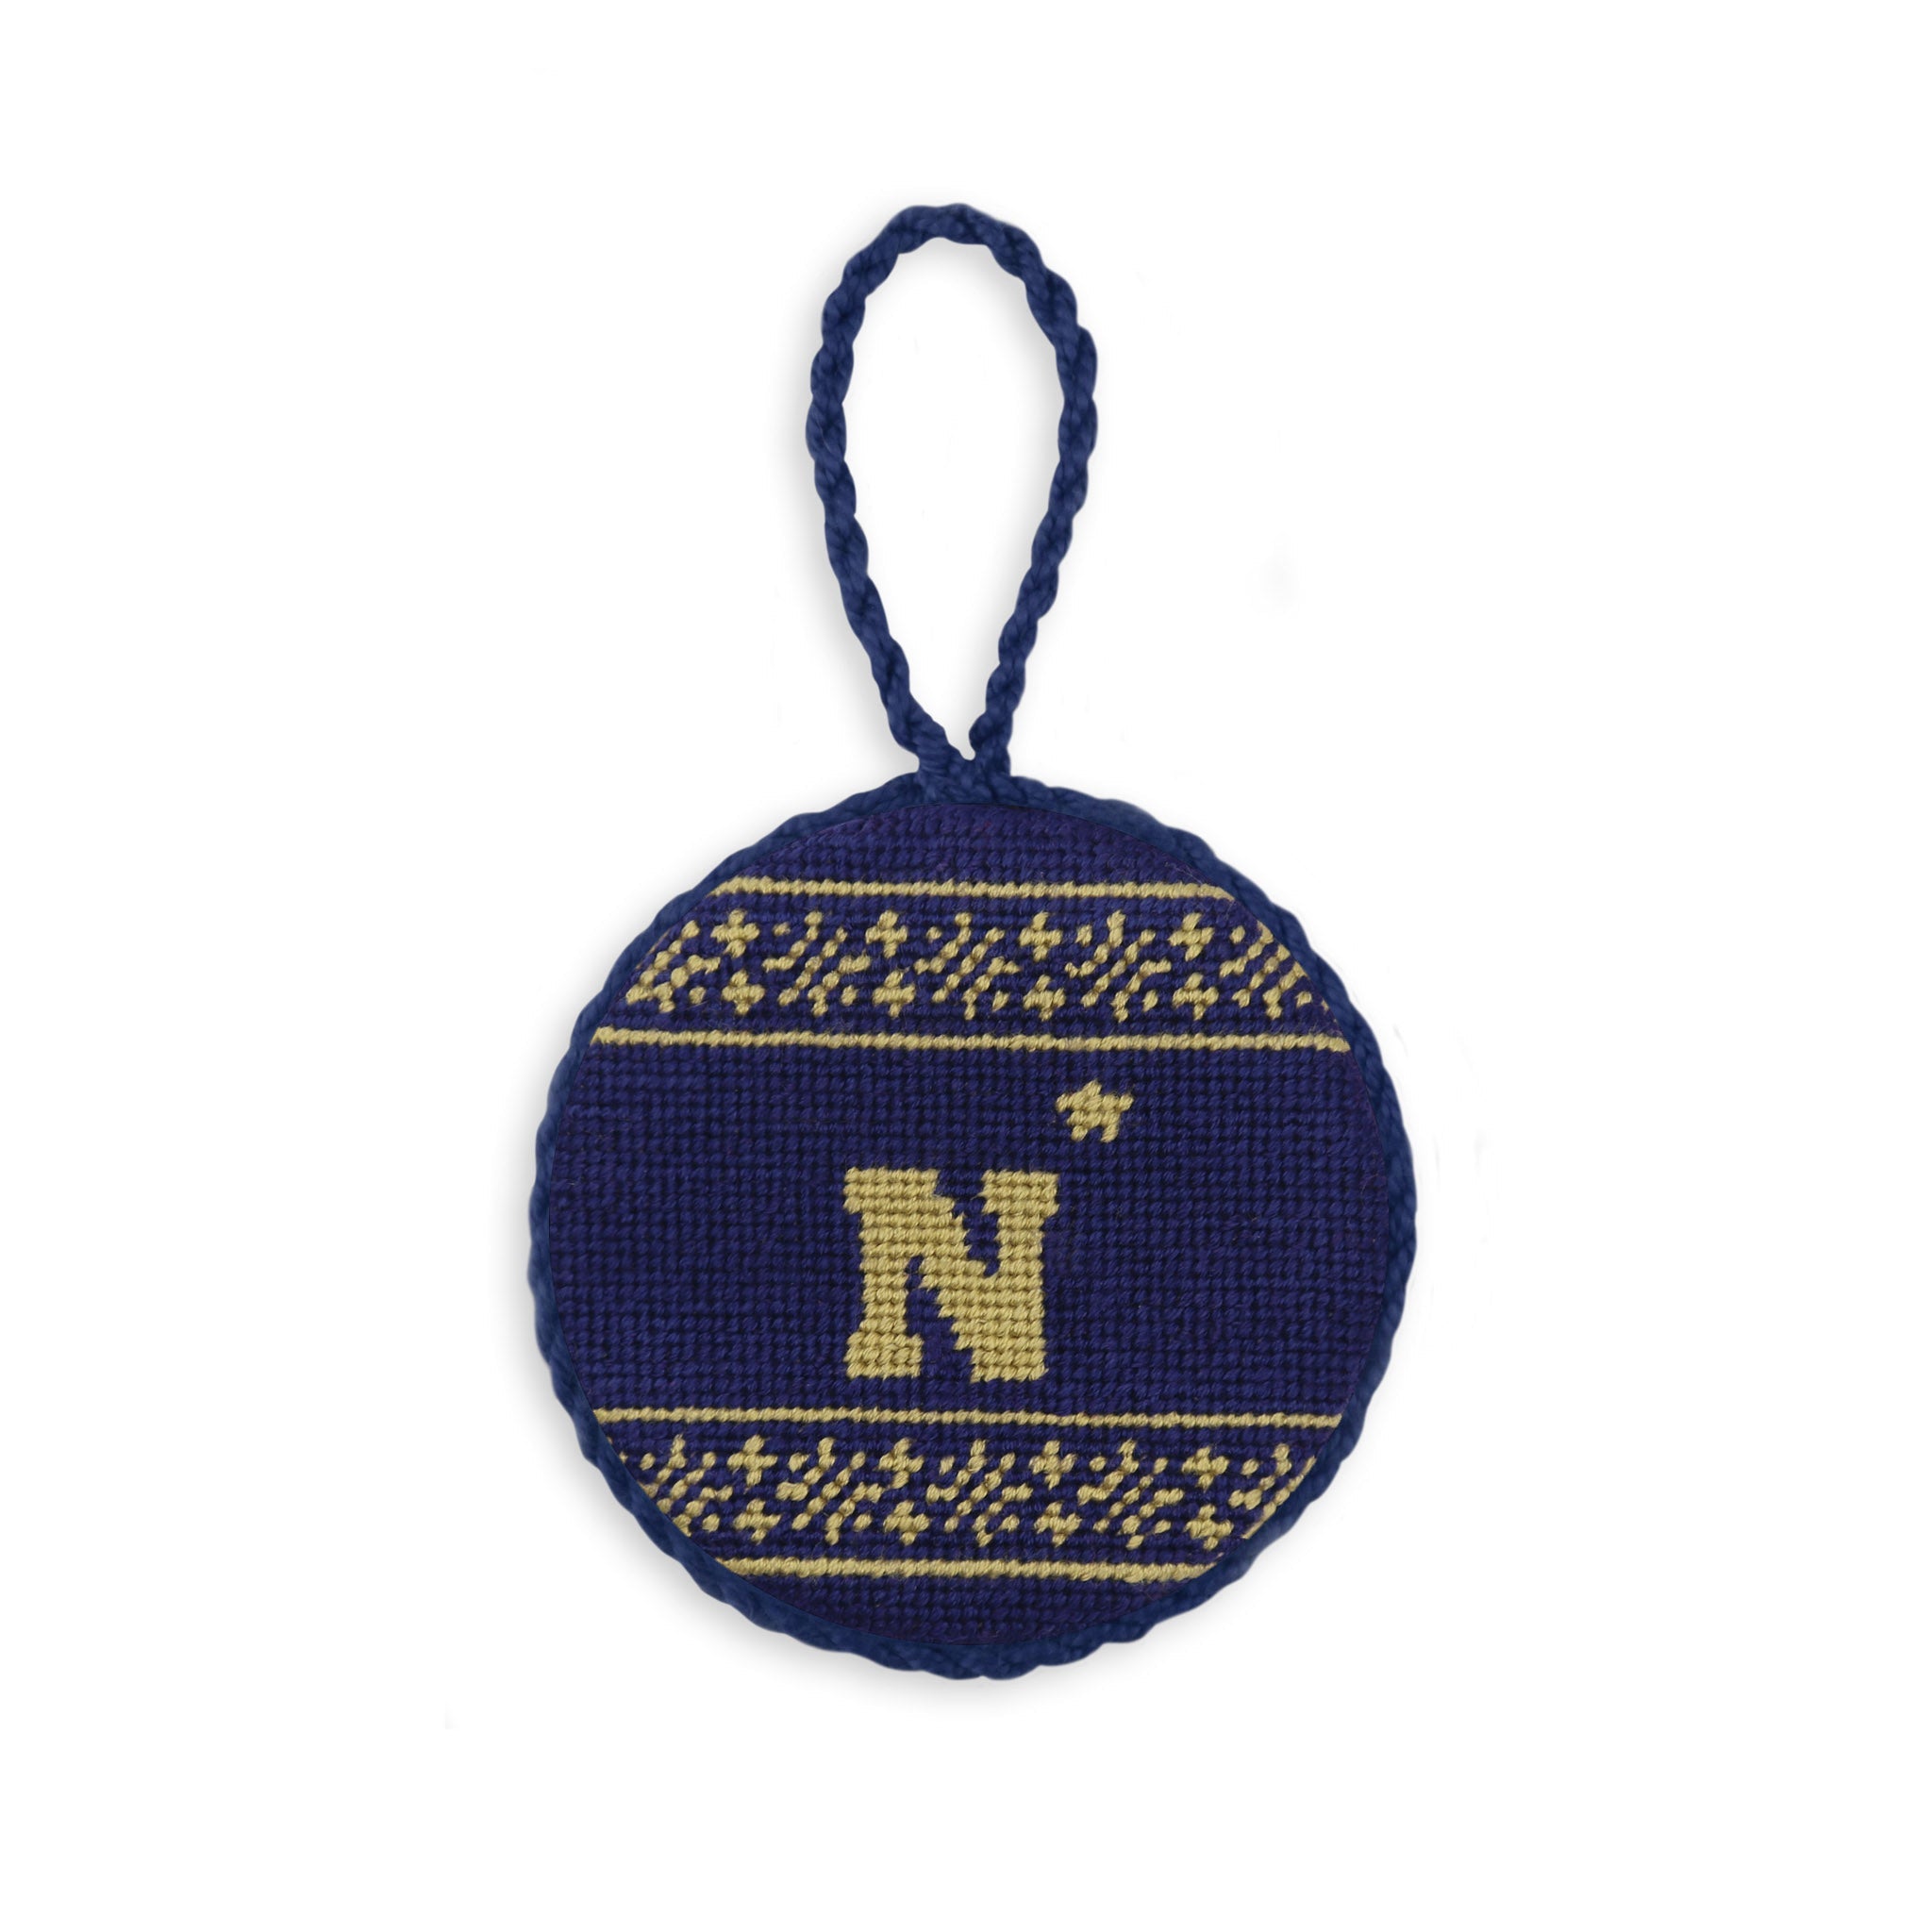 Smathers and Branson Naval Academy Needlepoint Ornament 